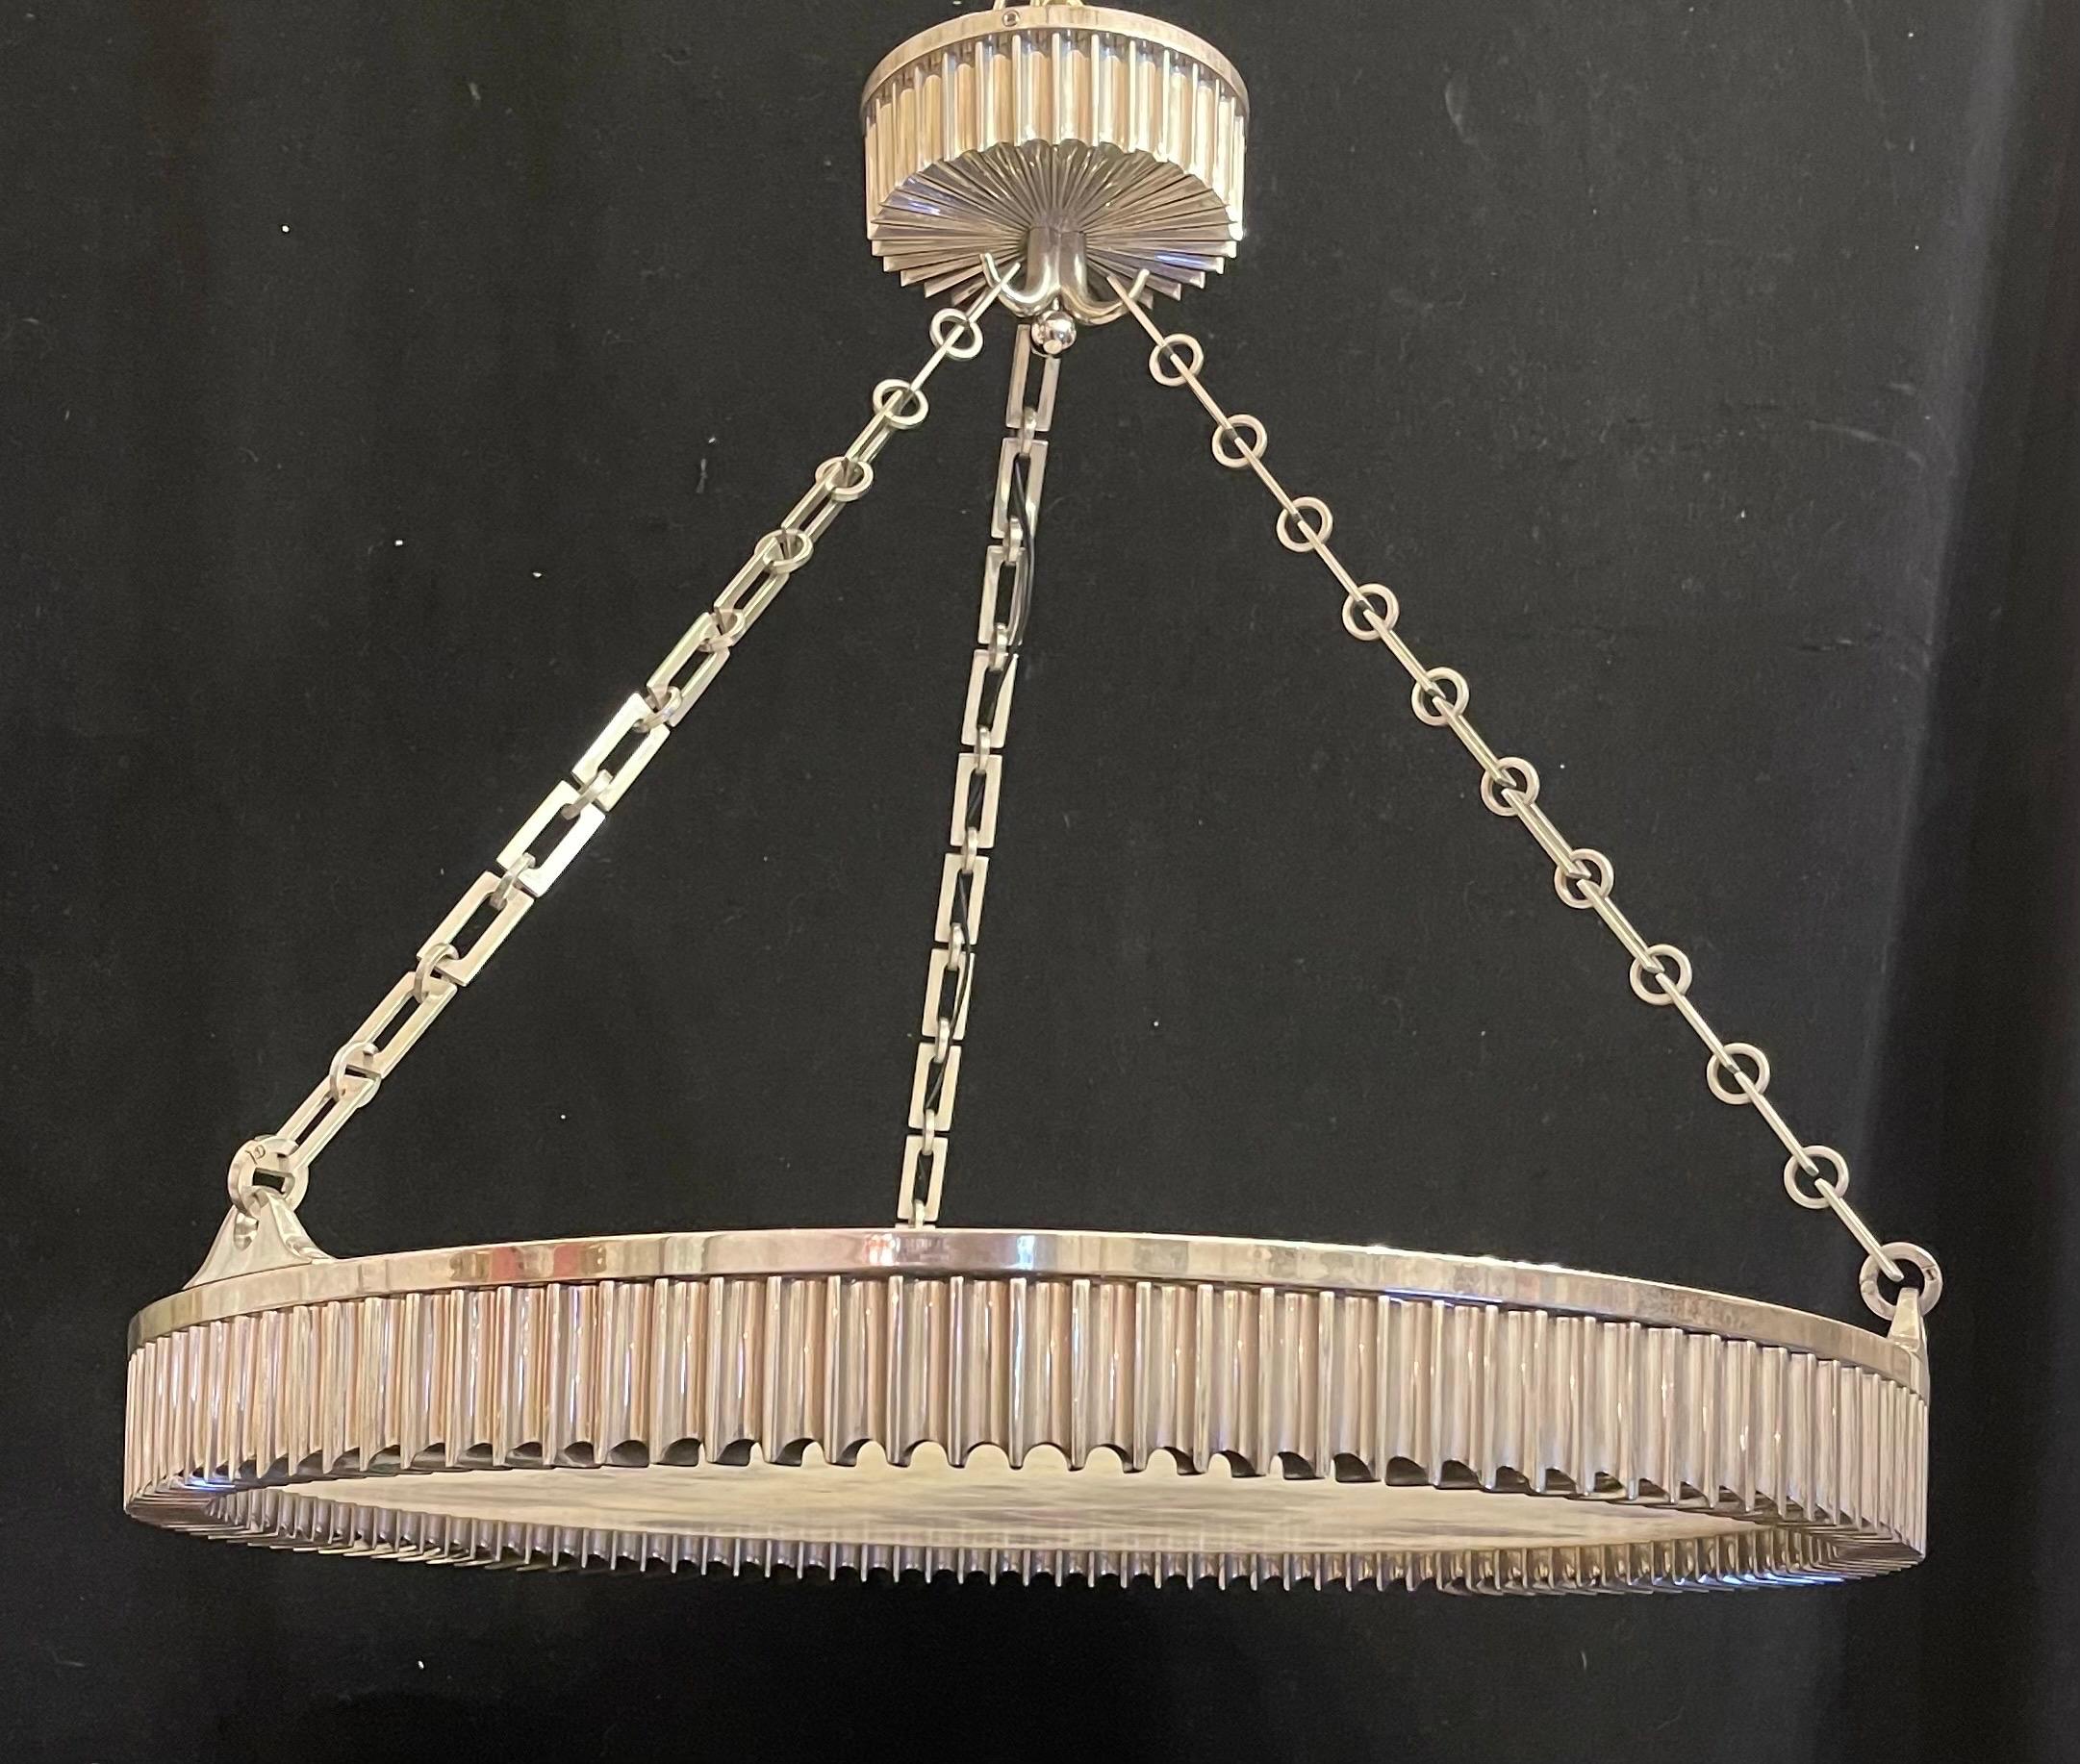 A Wonderful Modern Ribbed Polished Nickel over bronze with rock / quartz crystal center this beautiful round chandelier Measures 24